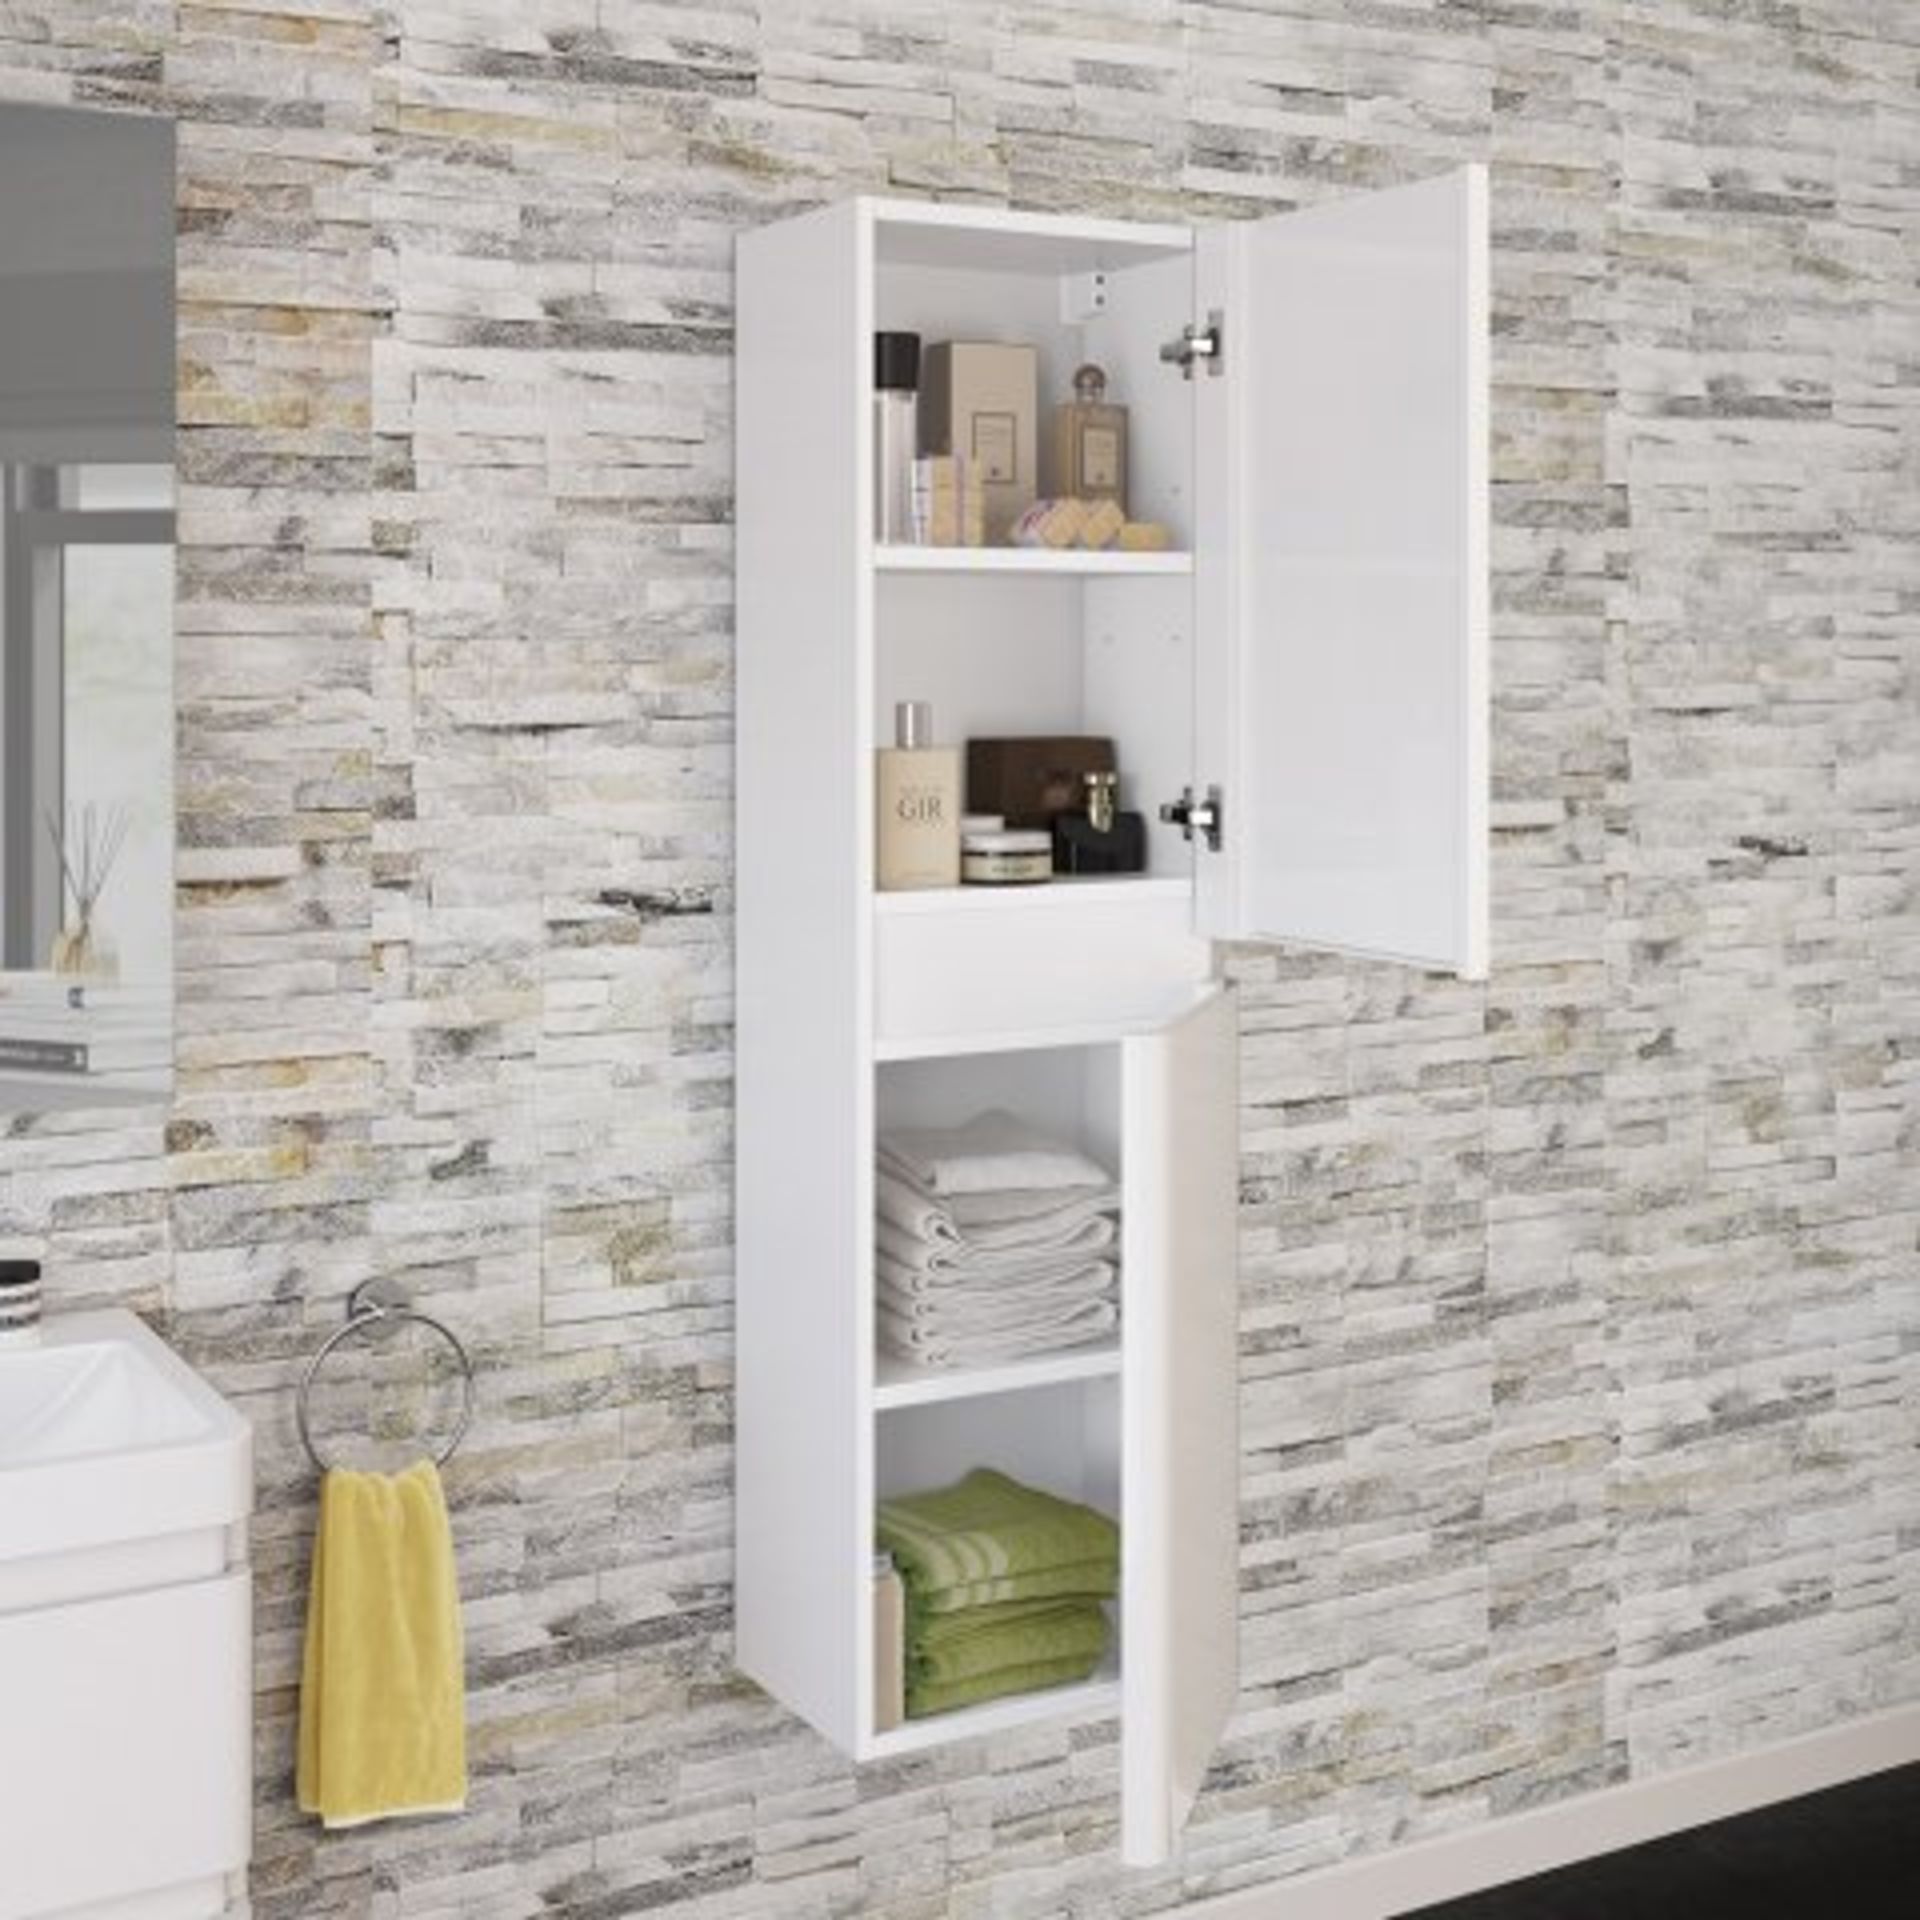 (O25) 1400mm Denver II Gloss White Tall Storage Cabinet - Wall Hung. RRP £299.99. With its gorgeous, - Image 2 of 3